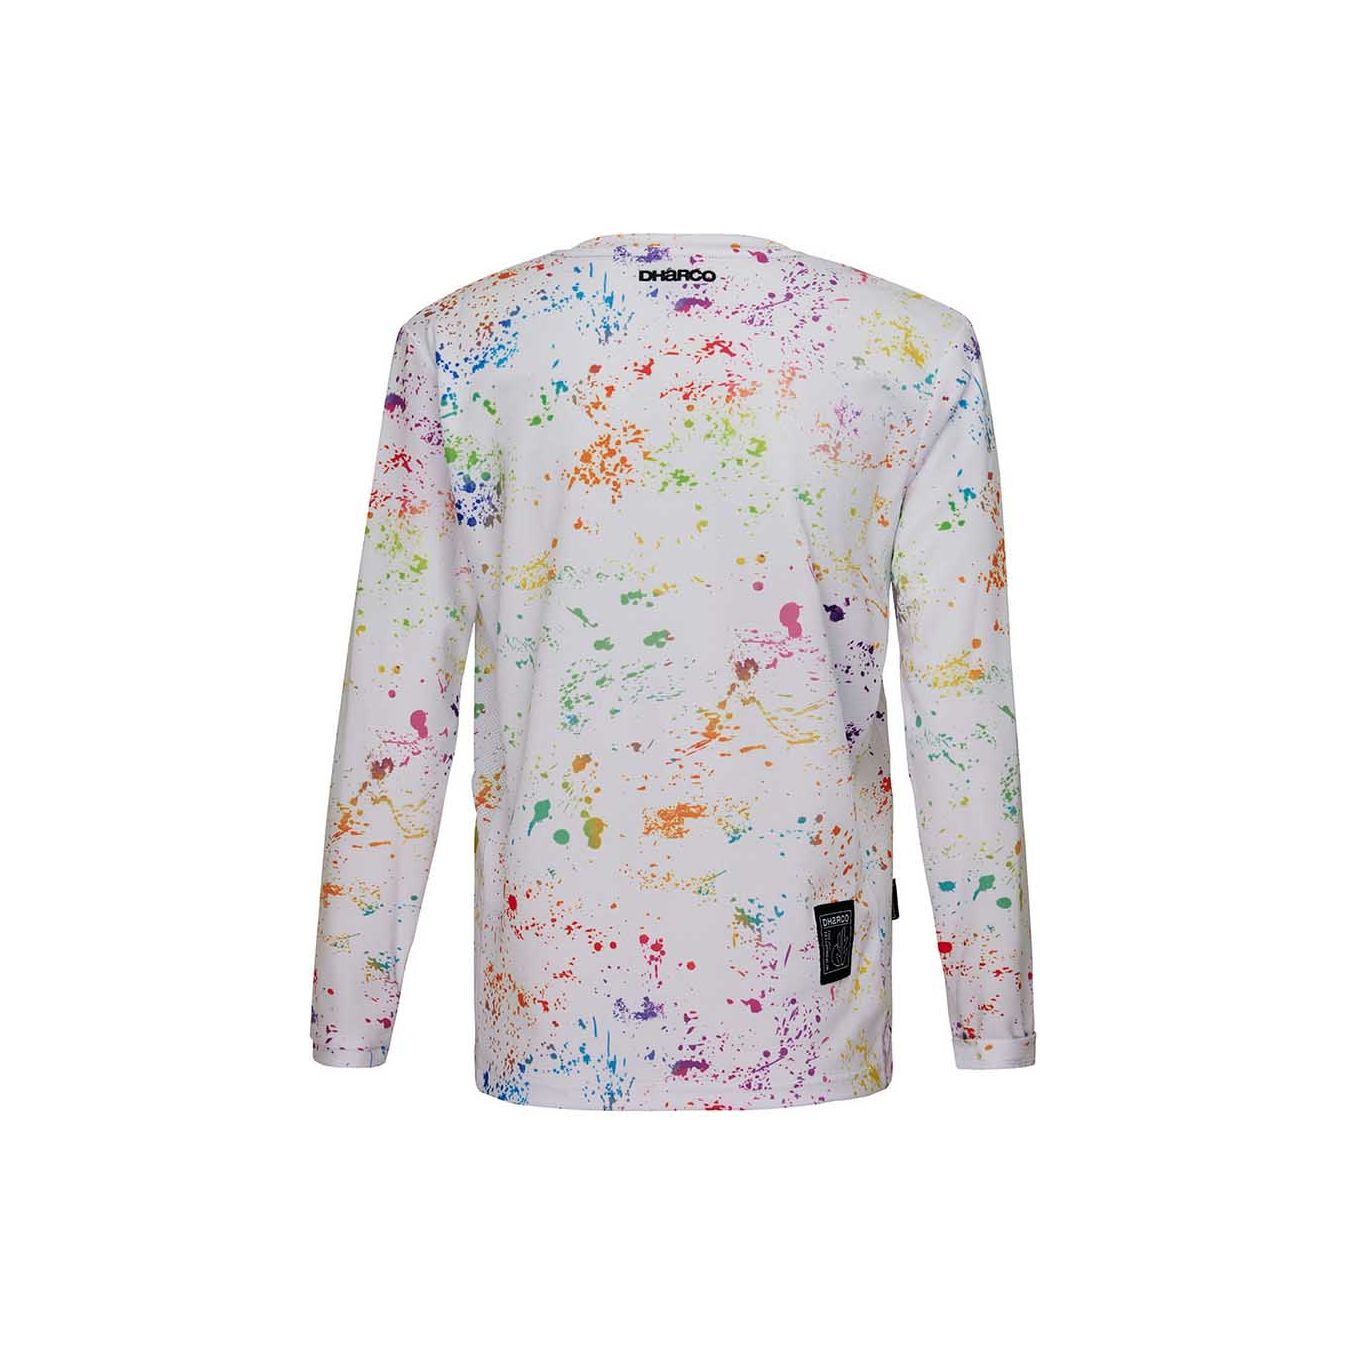 DHaRCO Youth Gravity Long Sleeve Jersey - Youth 2XL - Paint Splat